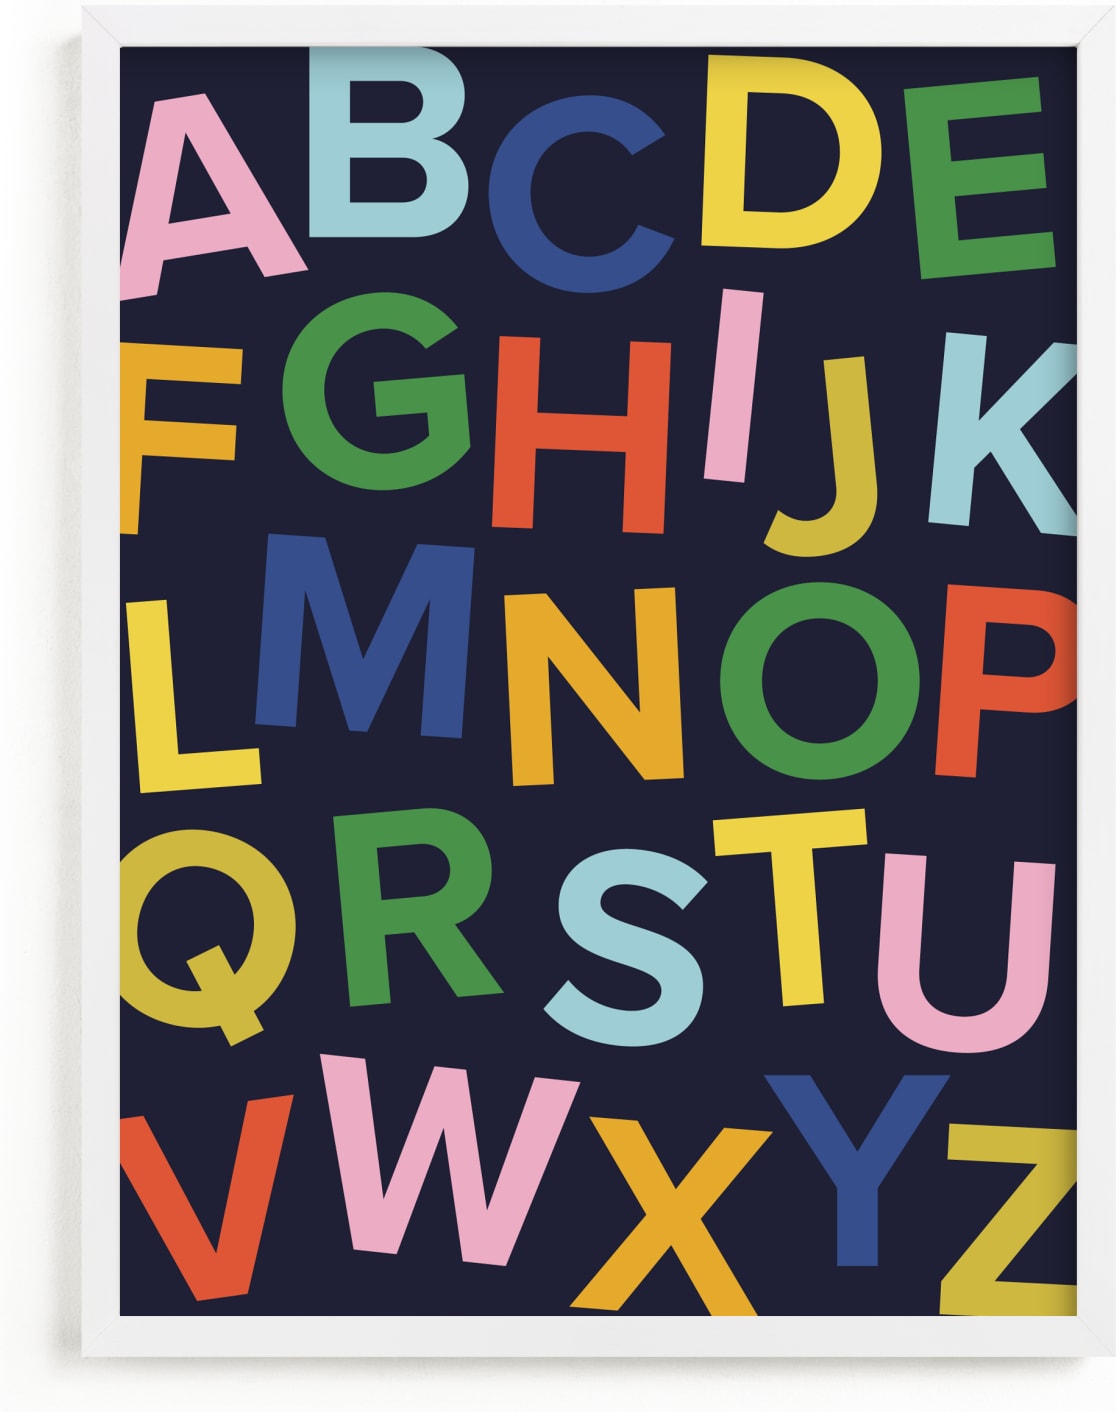 This is a colorful art by Ellen Schlegelmilch called happy alphabet.